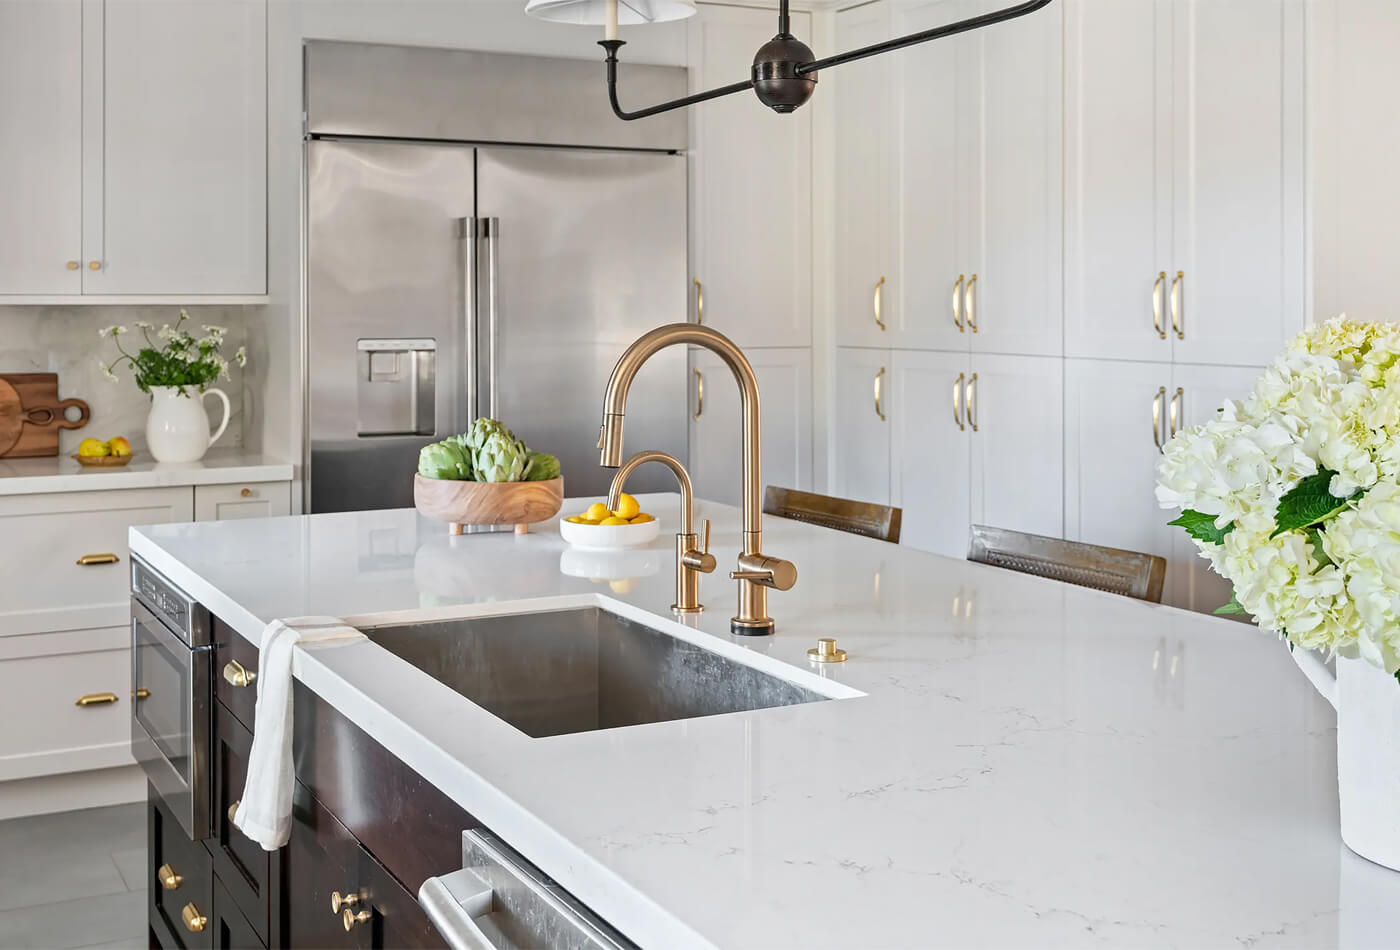 Is White Marble Countertops Overriding Others